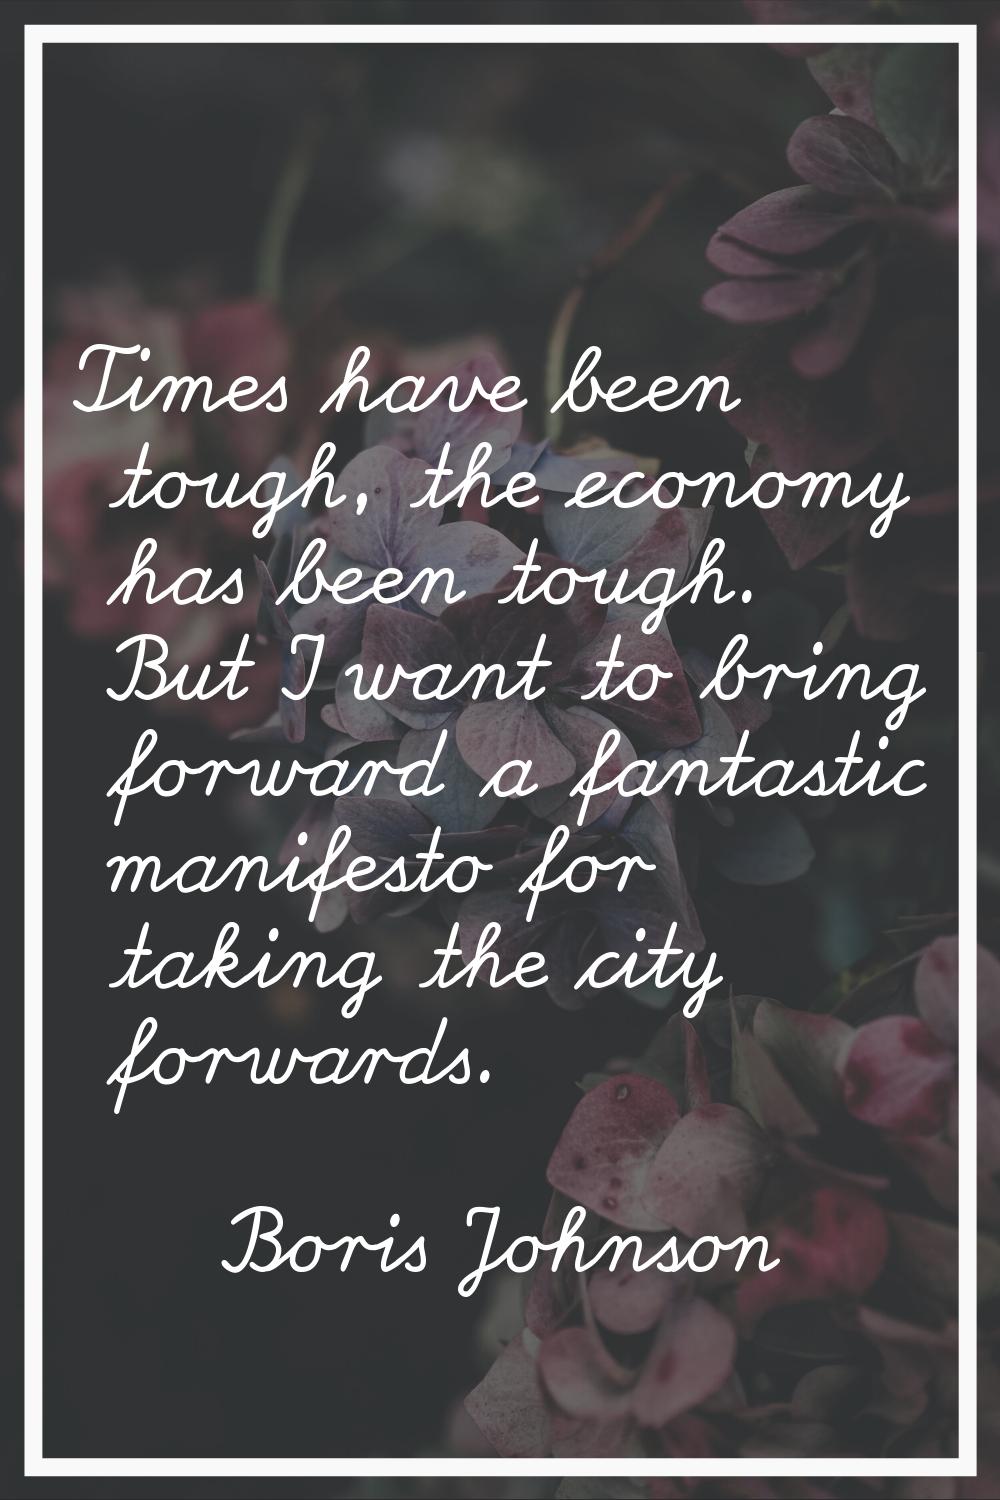 Times have been tough, the economy has been tough. But I want to bring forward a fantastic manifest